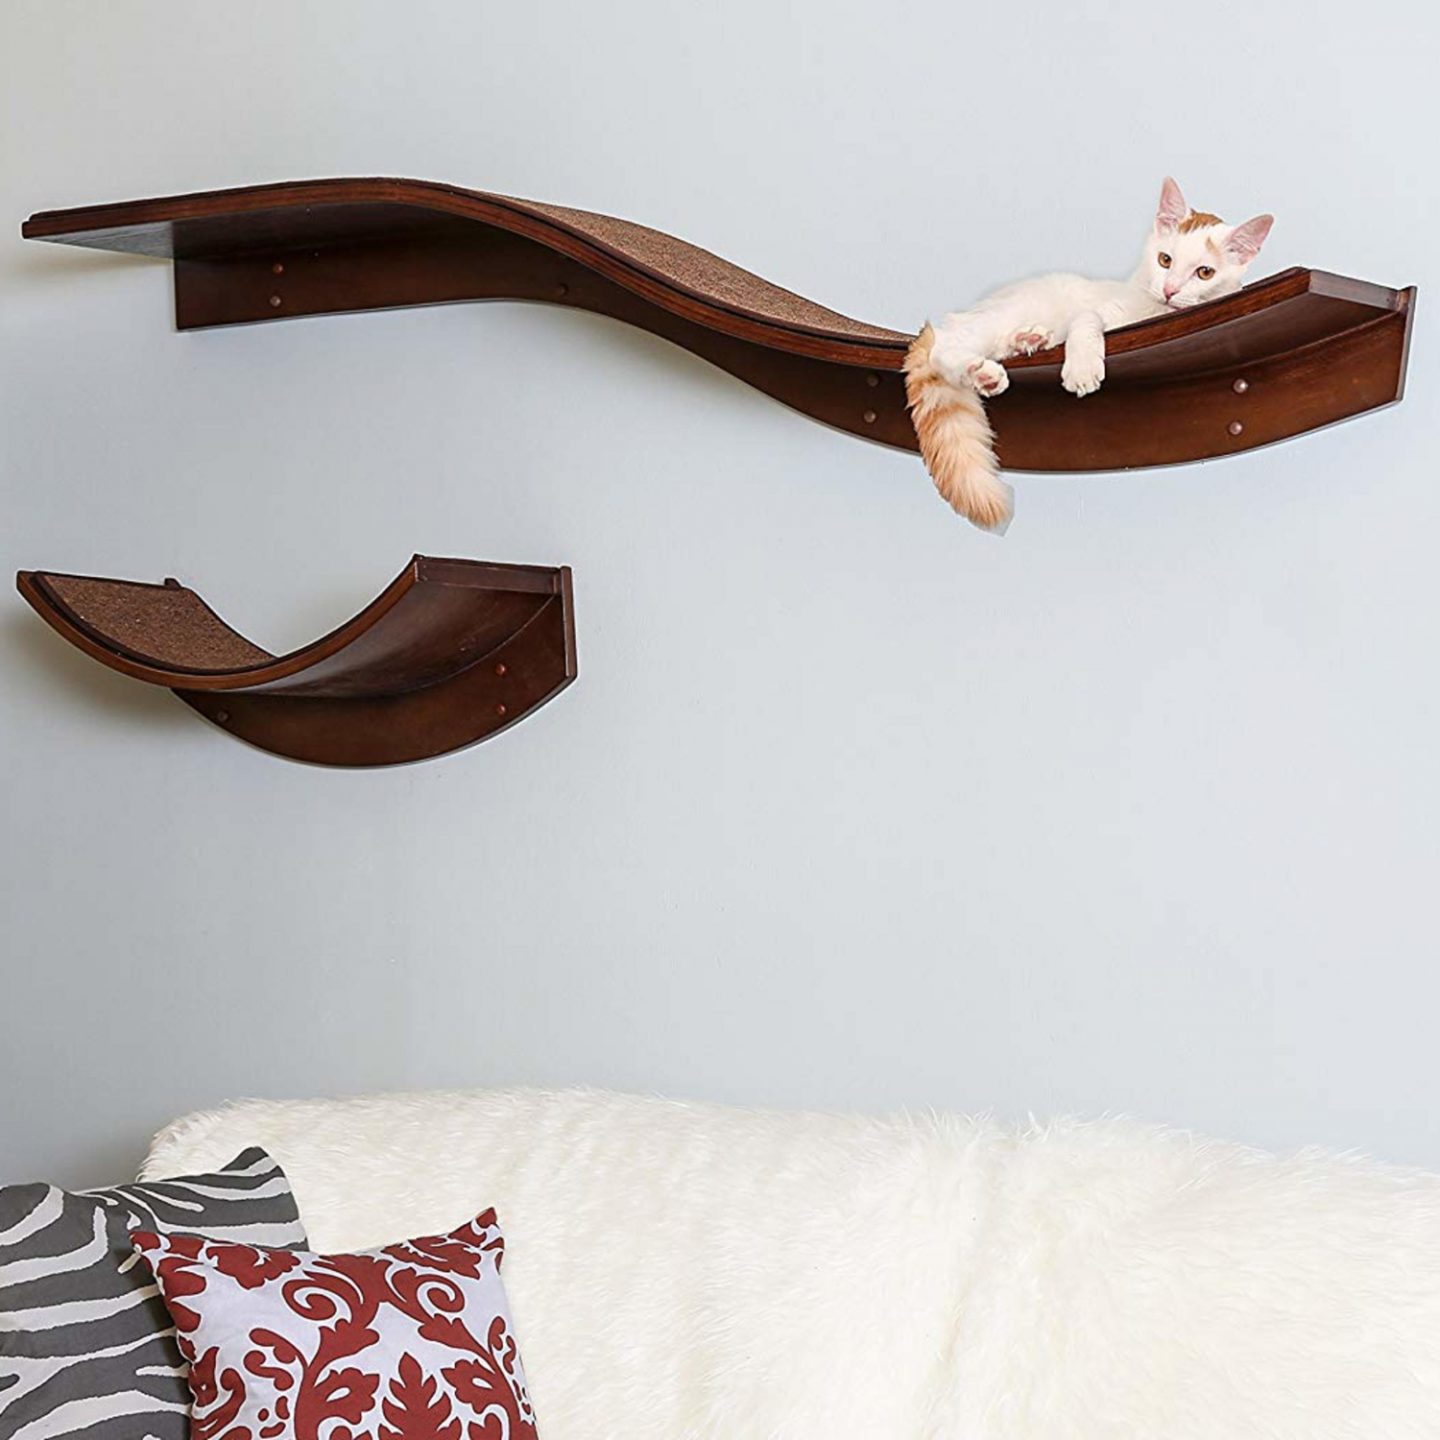 Sometimes the best cat shelves are elegant, curved and with replaceable carpet.  The refined feline lotus branch cat shelf has all of those things.  Okay, that's it for my cheesy commentary. 